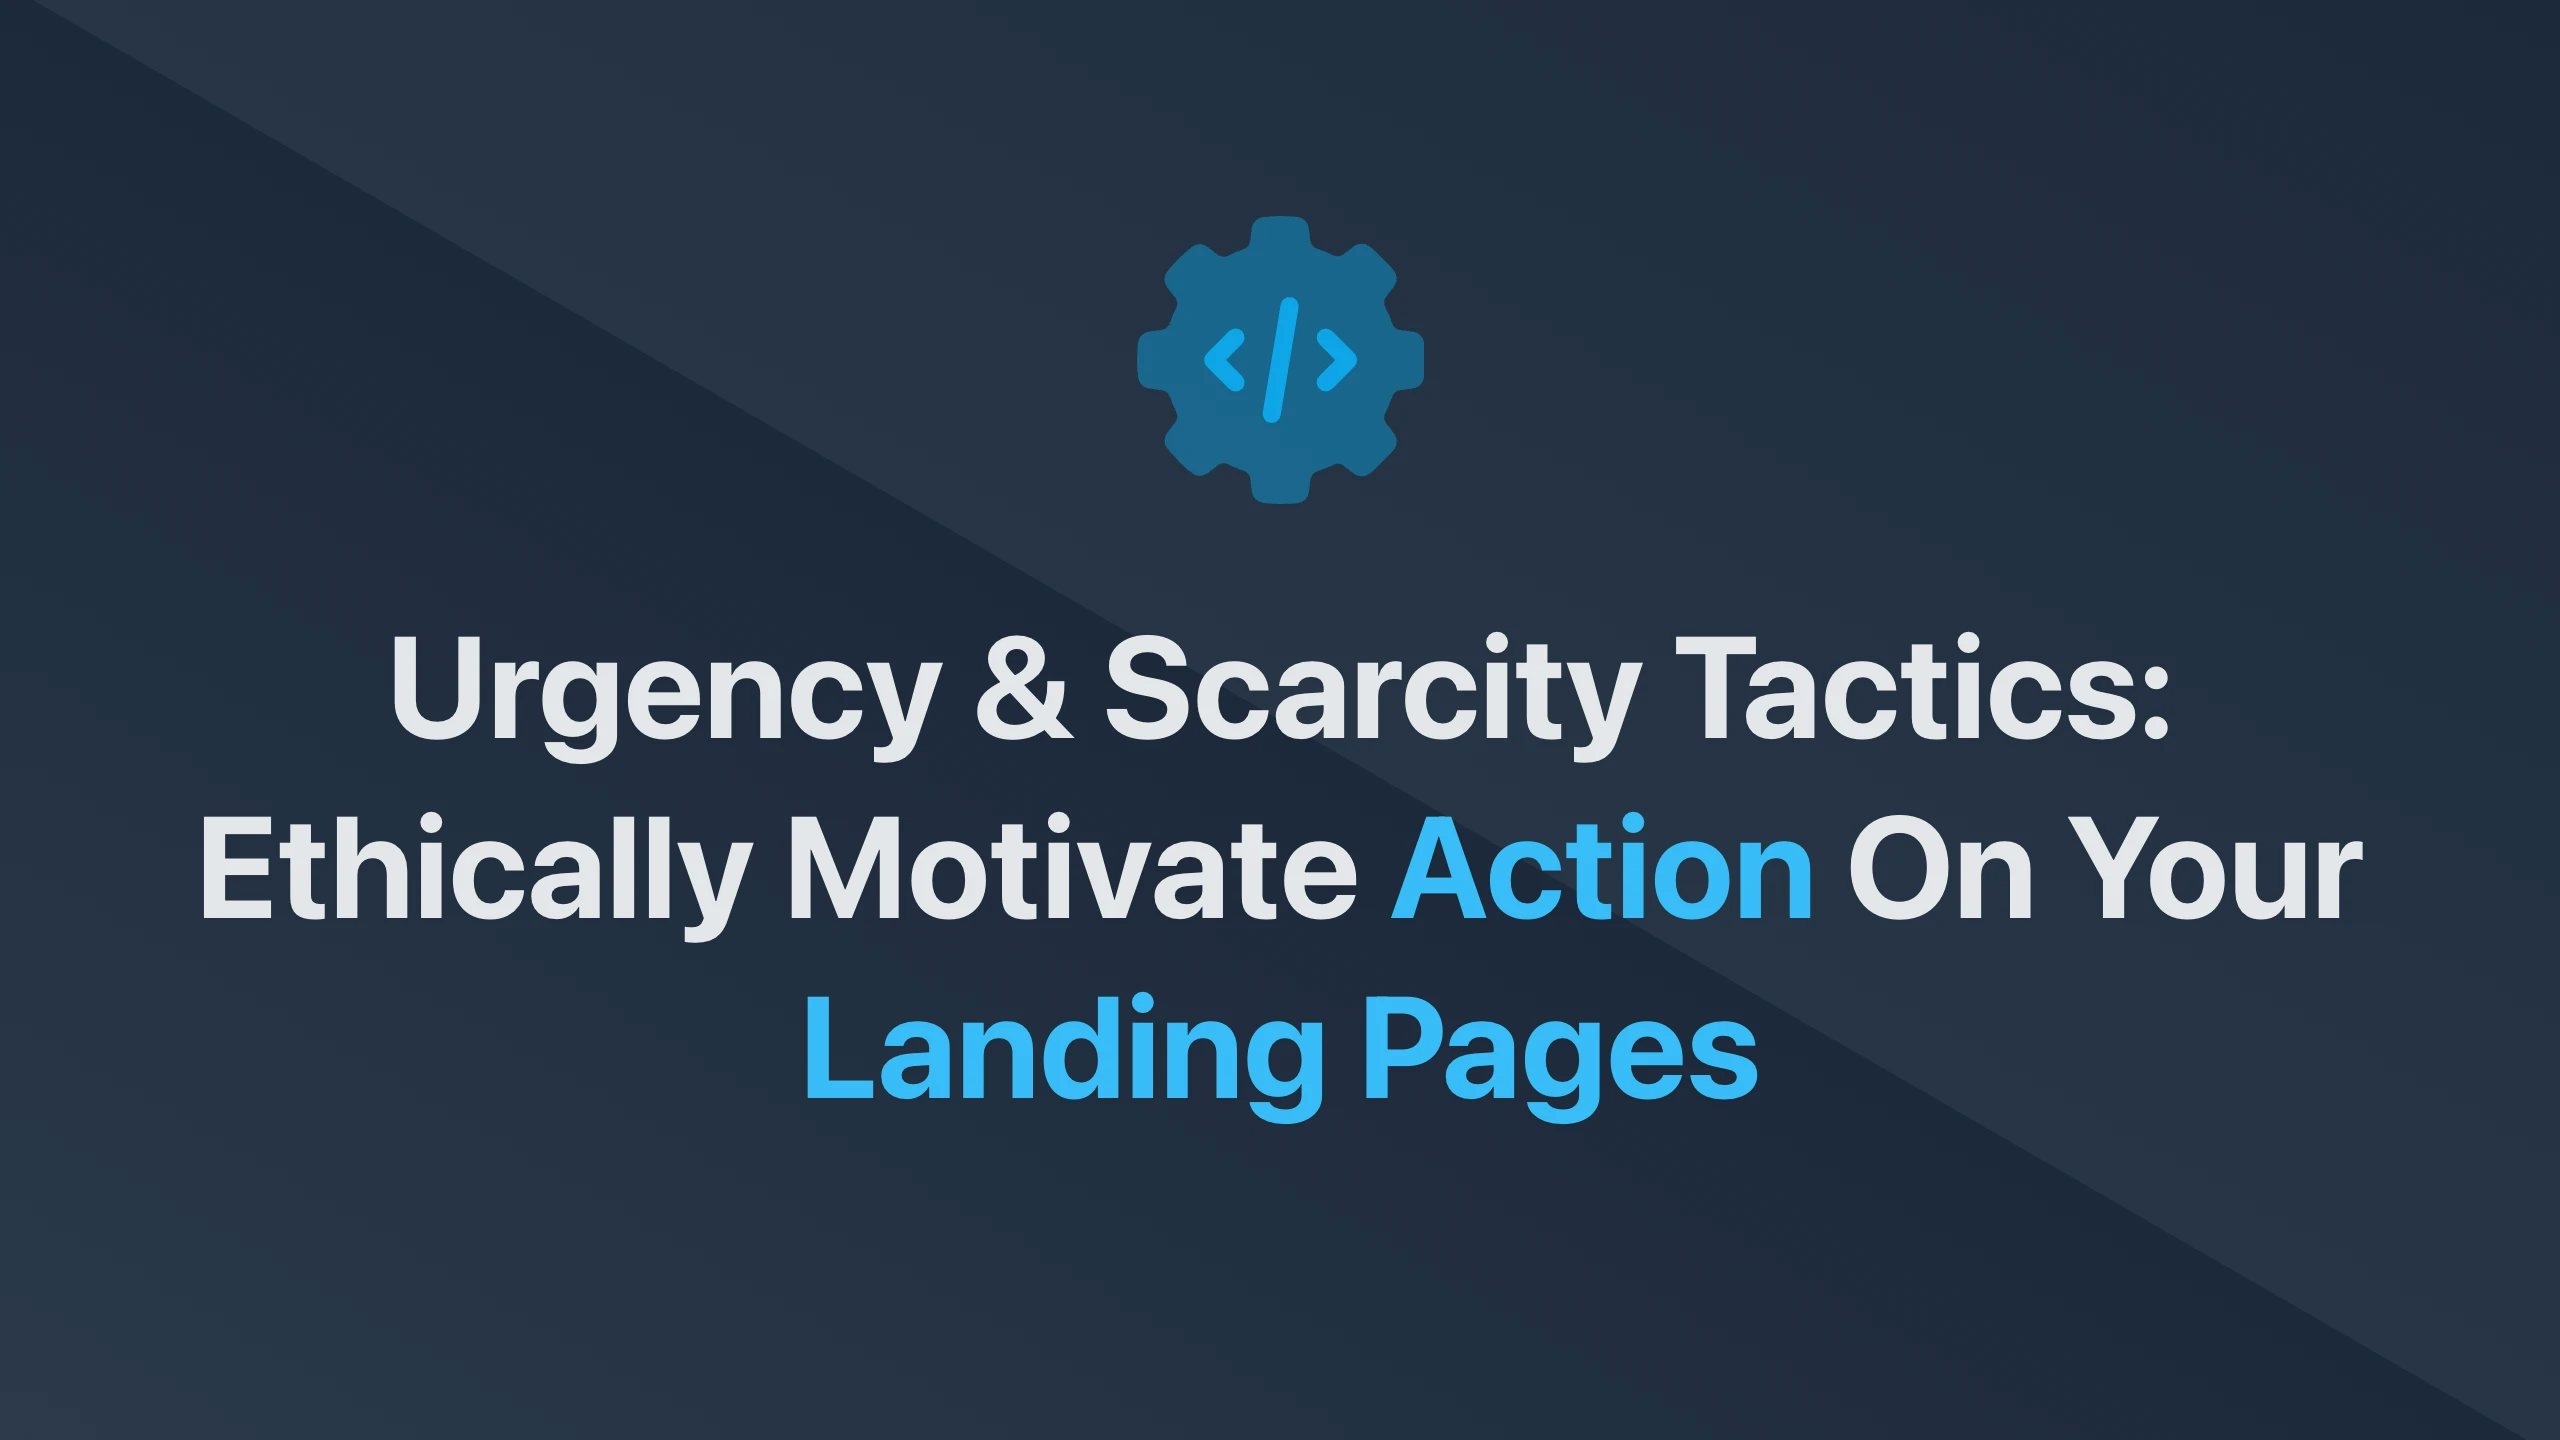 Cover Image for Urgency & Scarcity Tactics: Ethically Motivate Action on Your Landing Pages